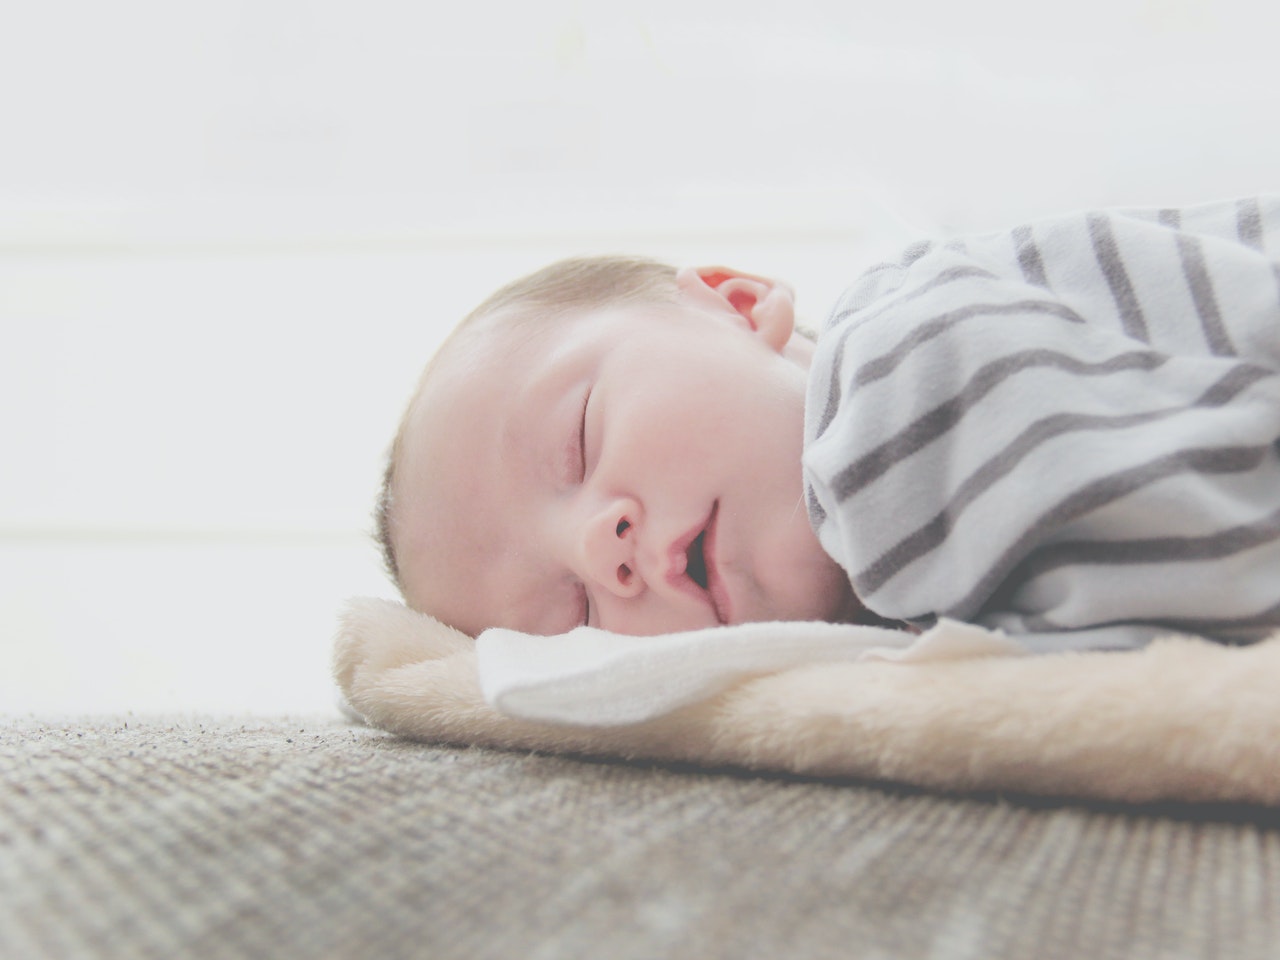 A baby sleeping on a bed Description automatically generated with medium confidence